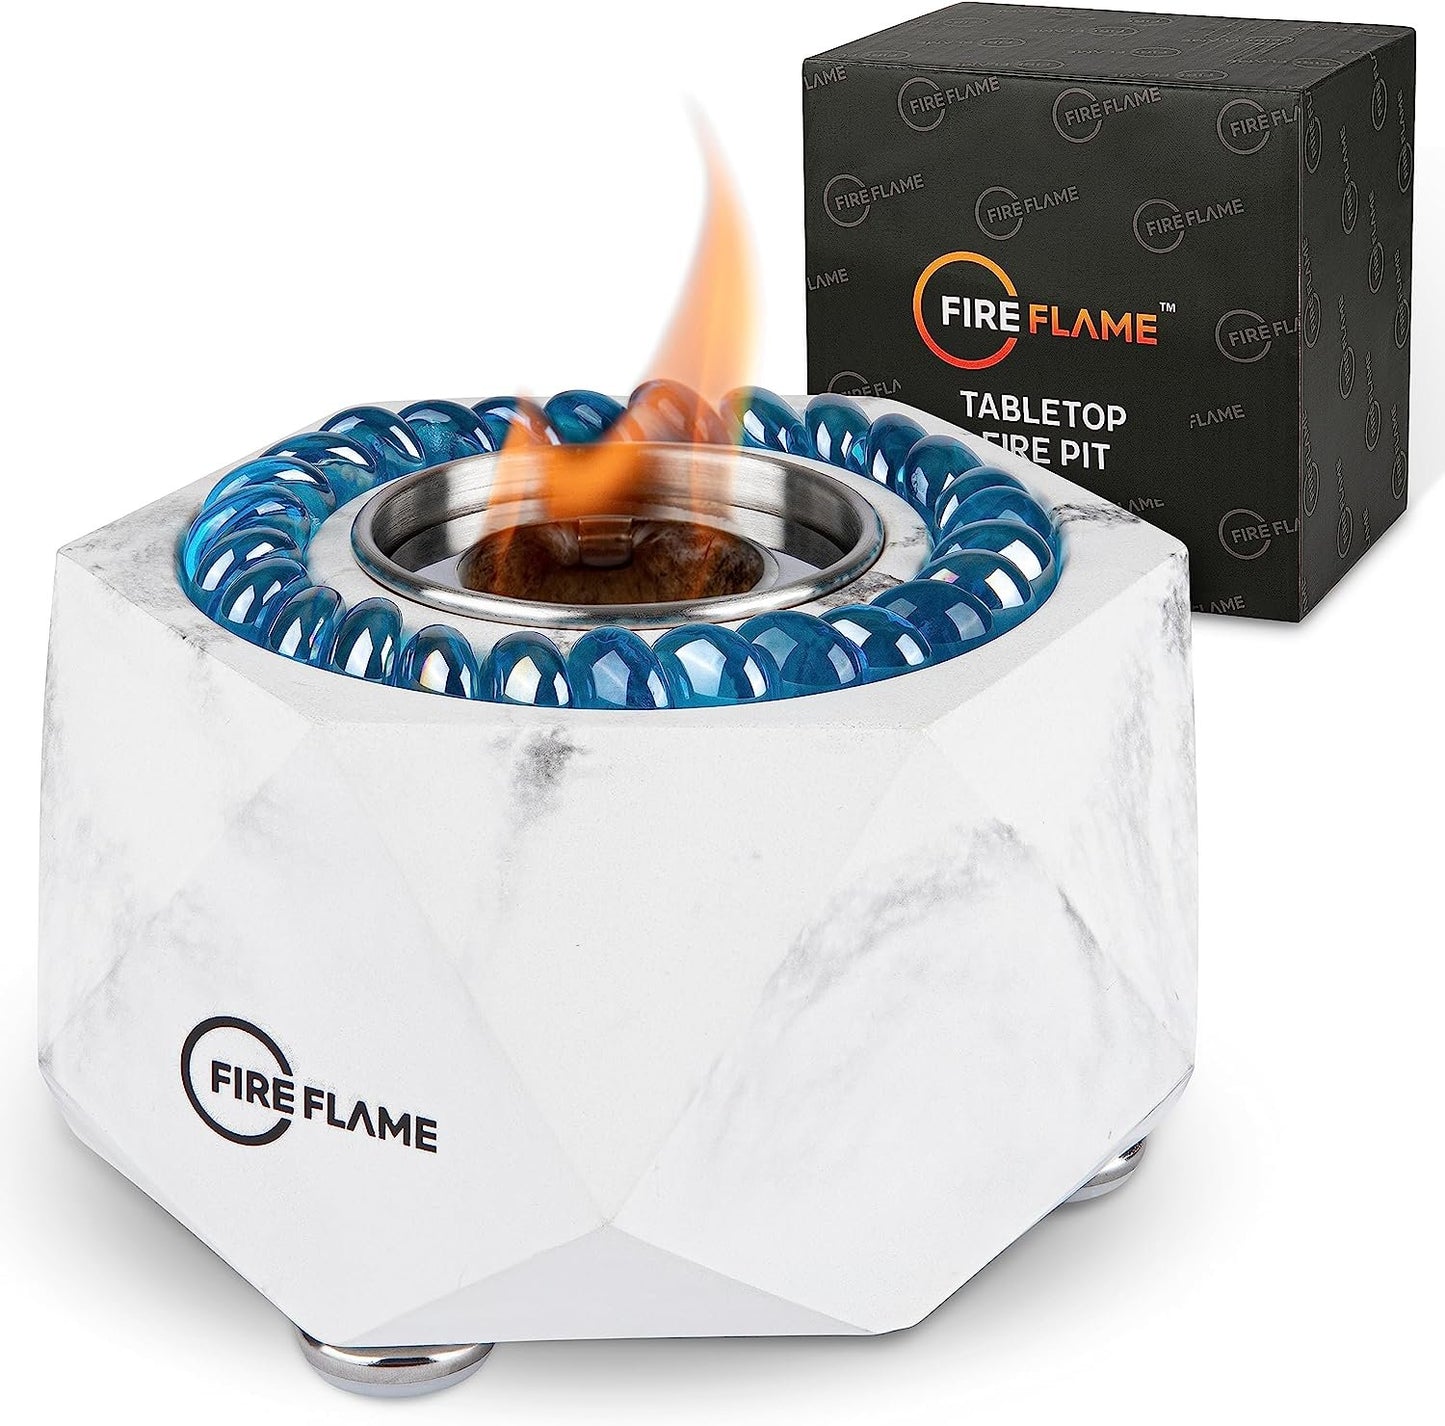 Fireflame Tabletop Fire Pit Bowl - Portable Concrete Mini Personal Fireplace Table top Firepit, Indoor Outdoor Decor & Smores Maker - Isopropyl/Bio Ethanol Fuel